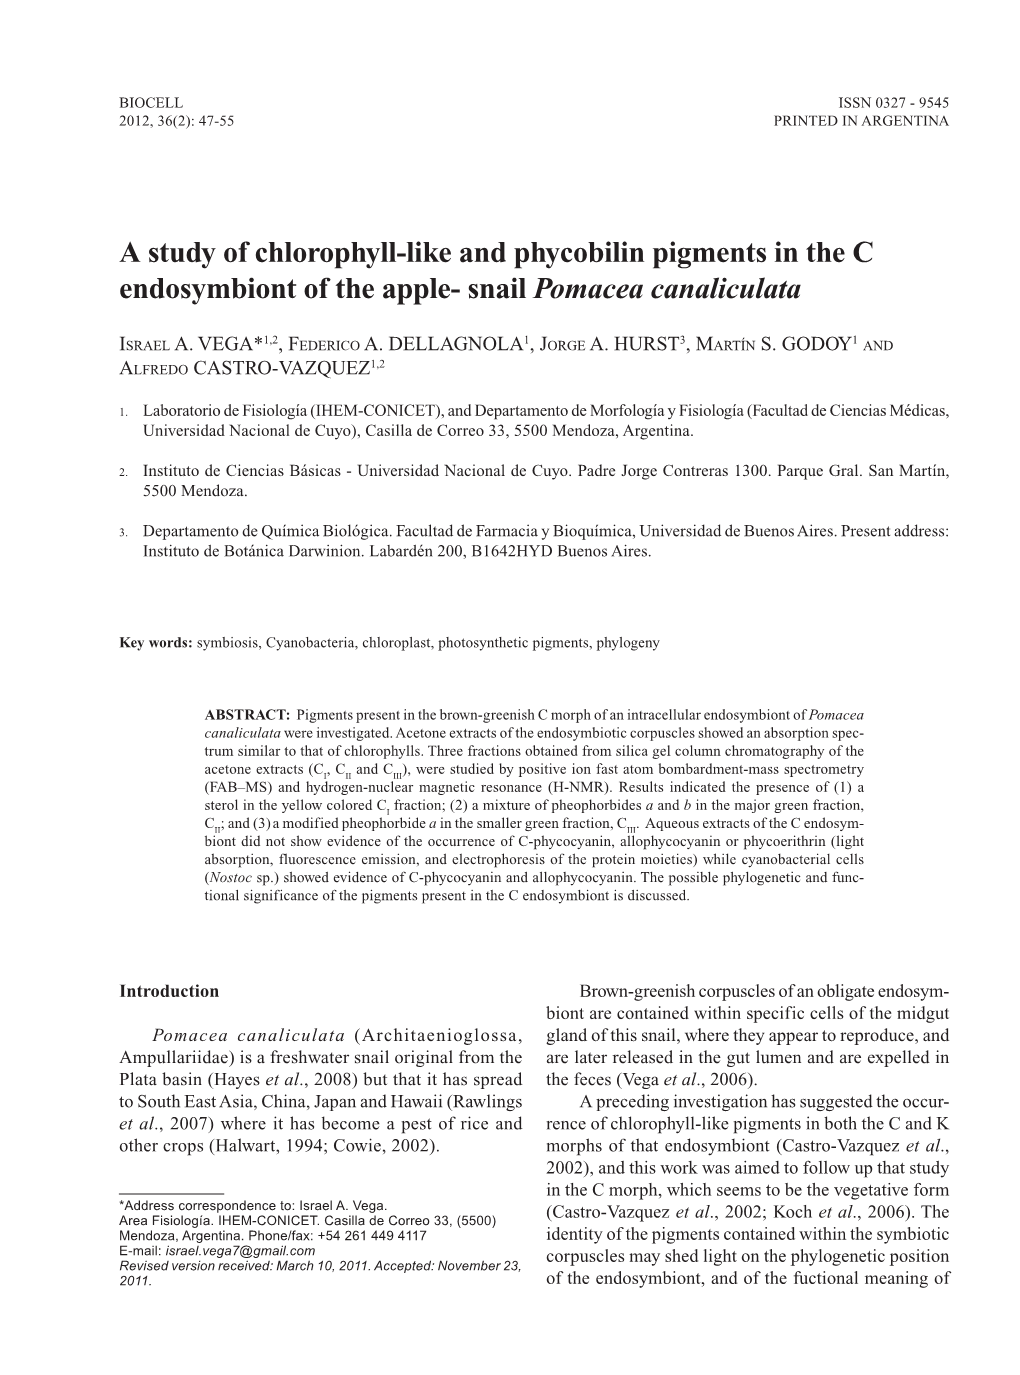 A Study of Chlorophyll-Like and Phycobilin Pigments in the C Endosymbiont of the Apple- Snail Pomacea Canaliculata